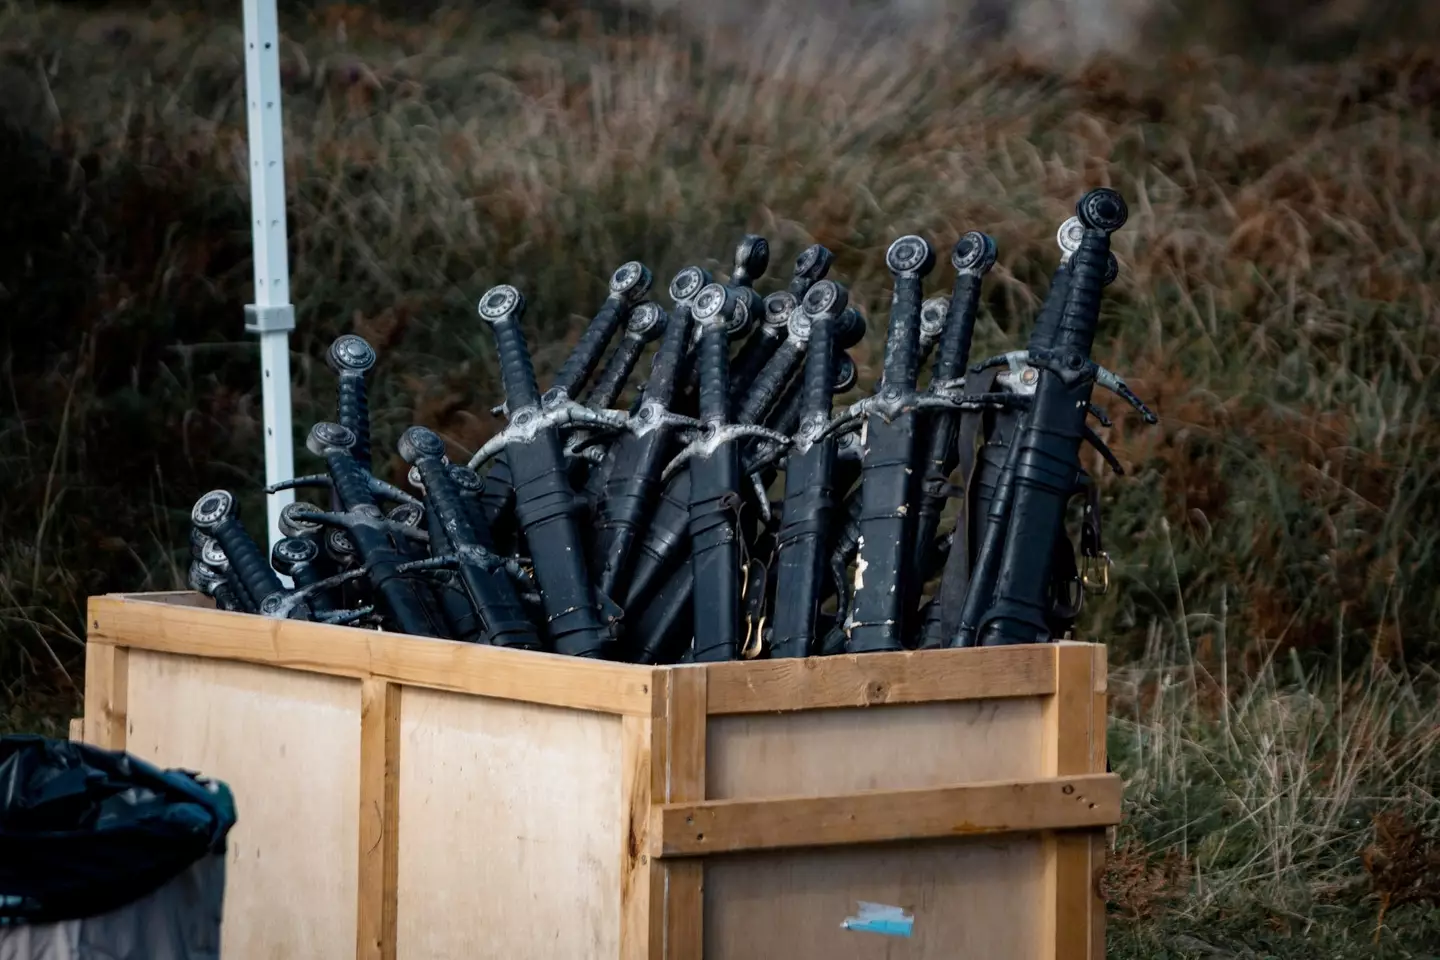 Weaponry was spotted on set for the big budget prequel (